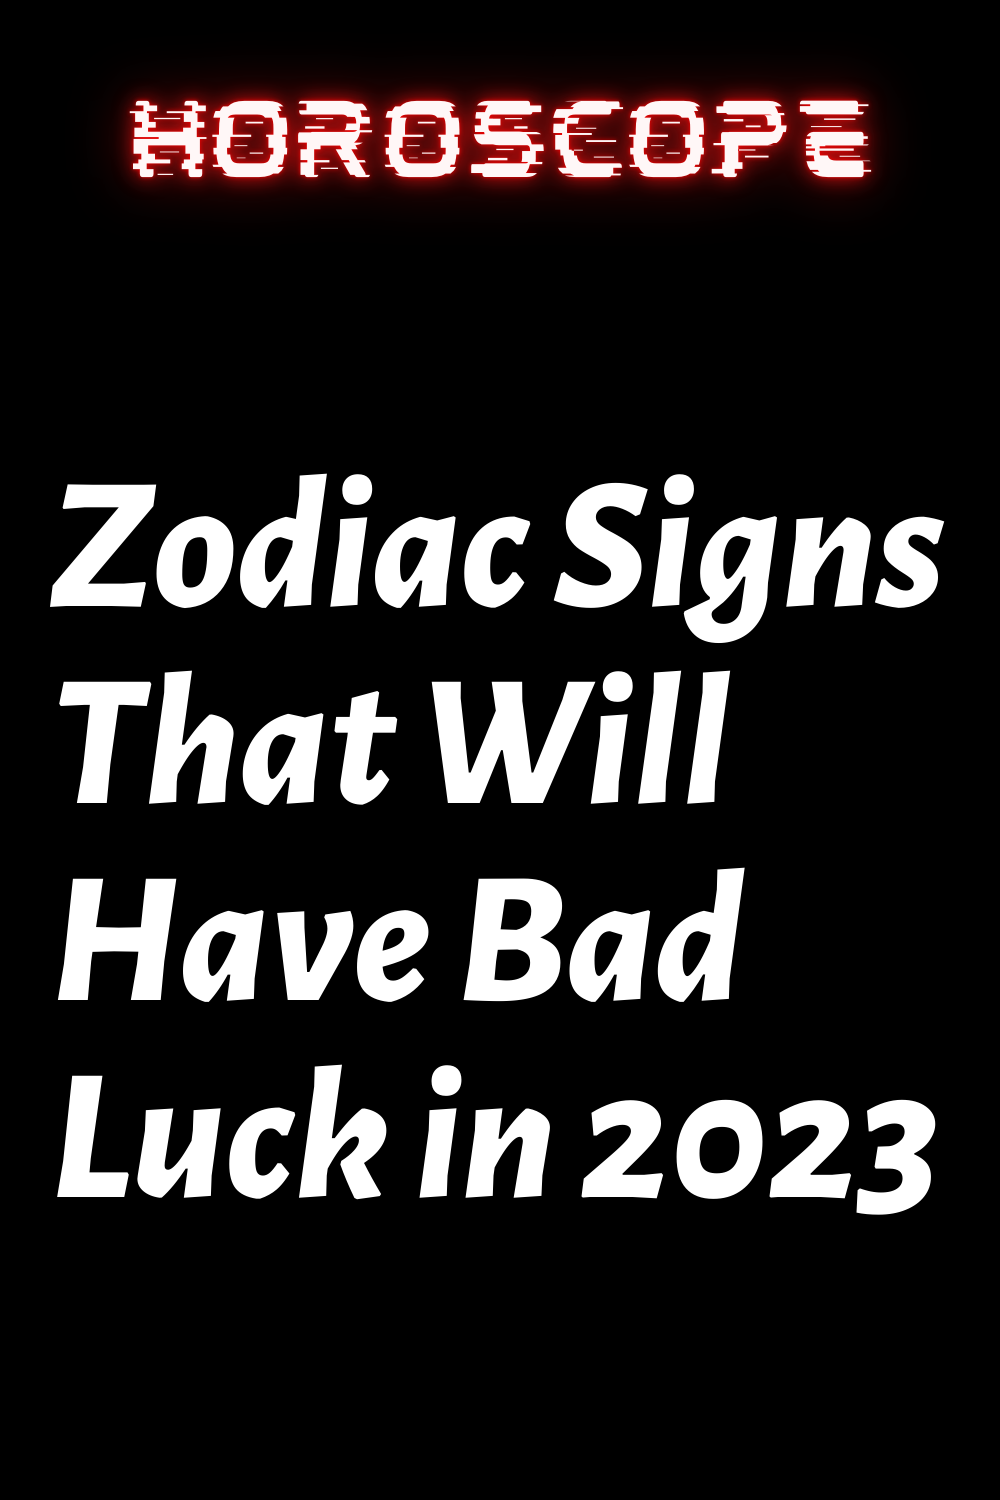 Zodiac Signs That Will Have Bad Luck in 2023 – ShineFeeds